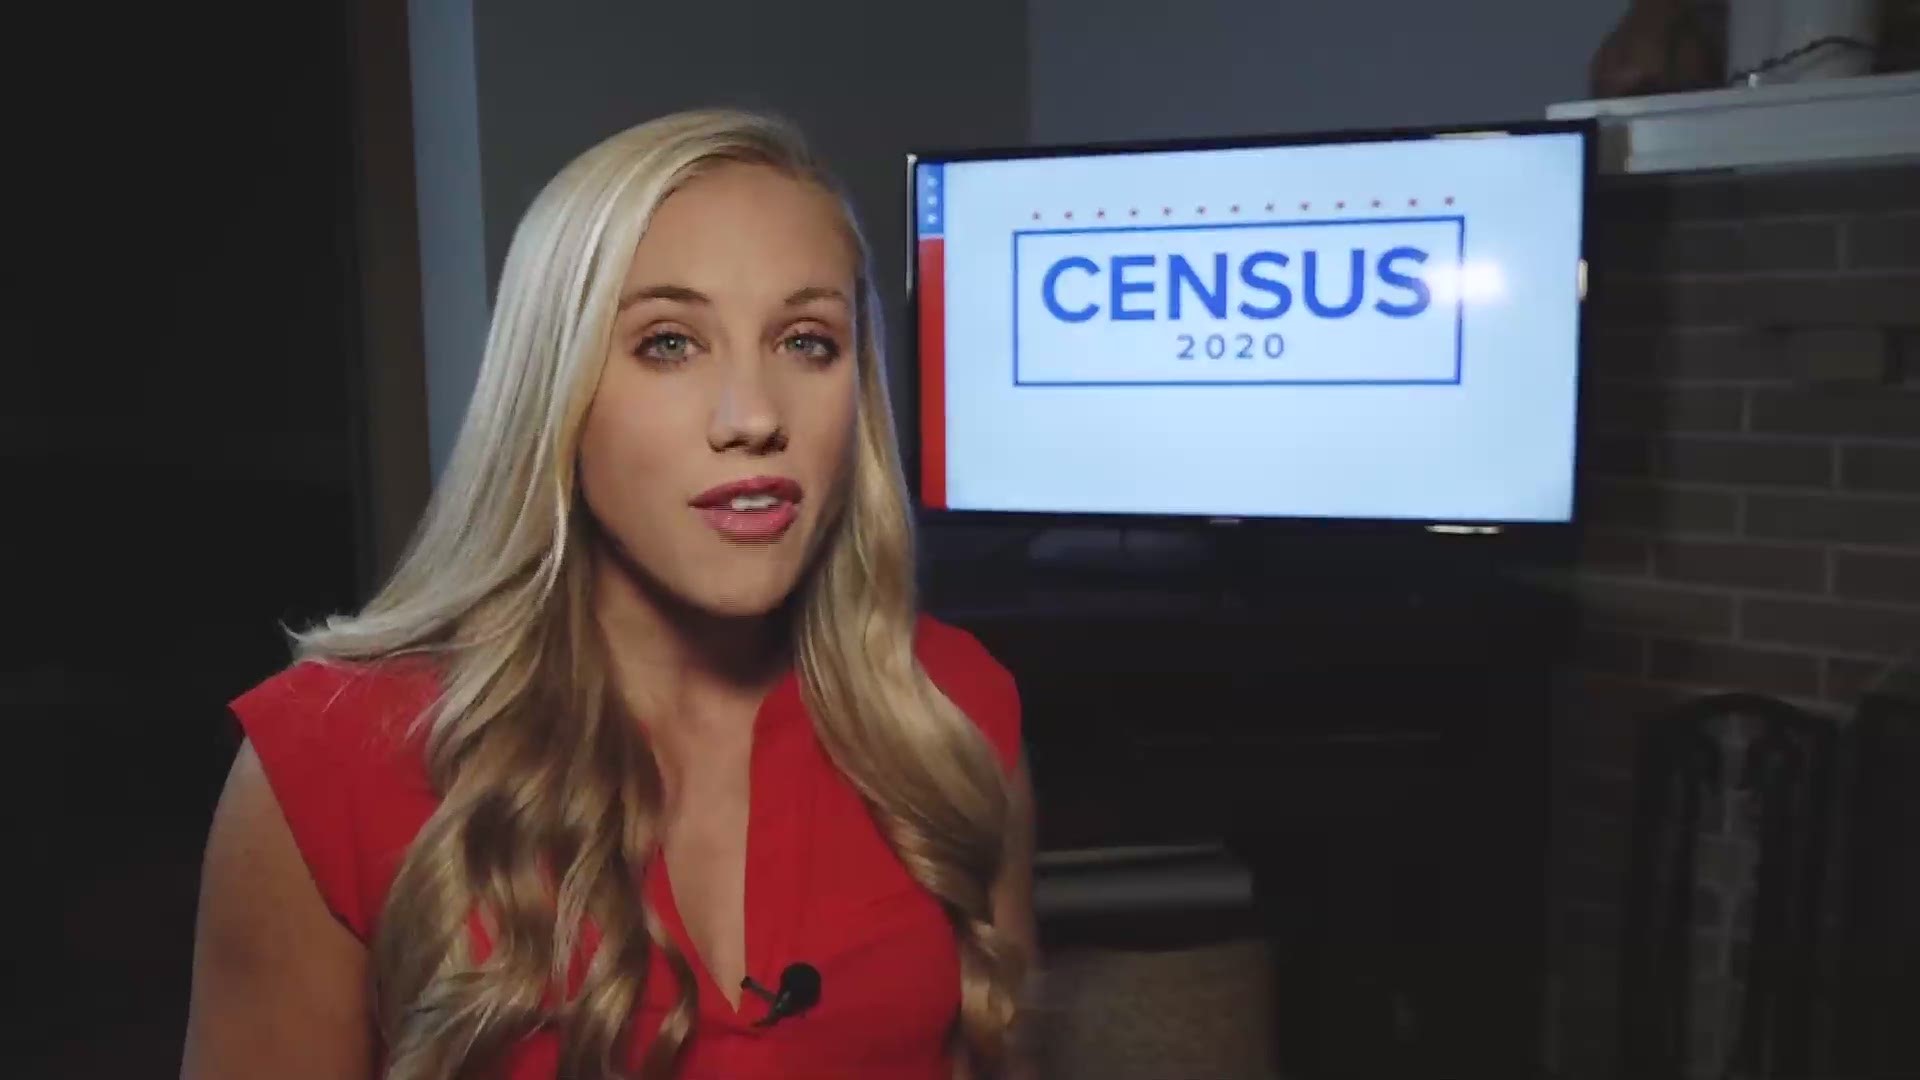 In two weeks, the 2020 US Census will wrap up, and it's important that you participate.